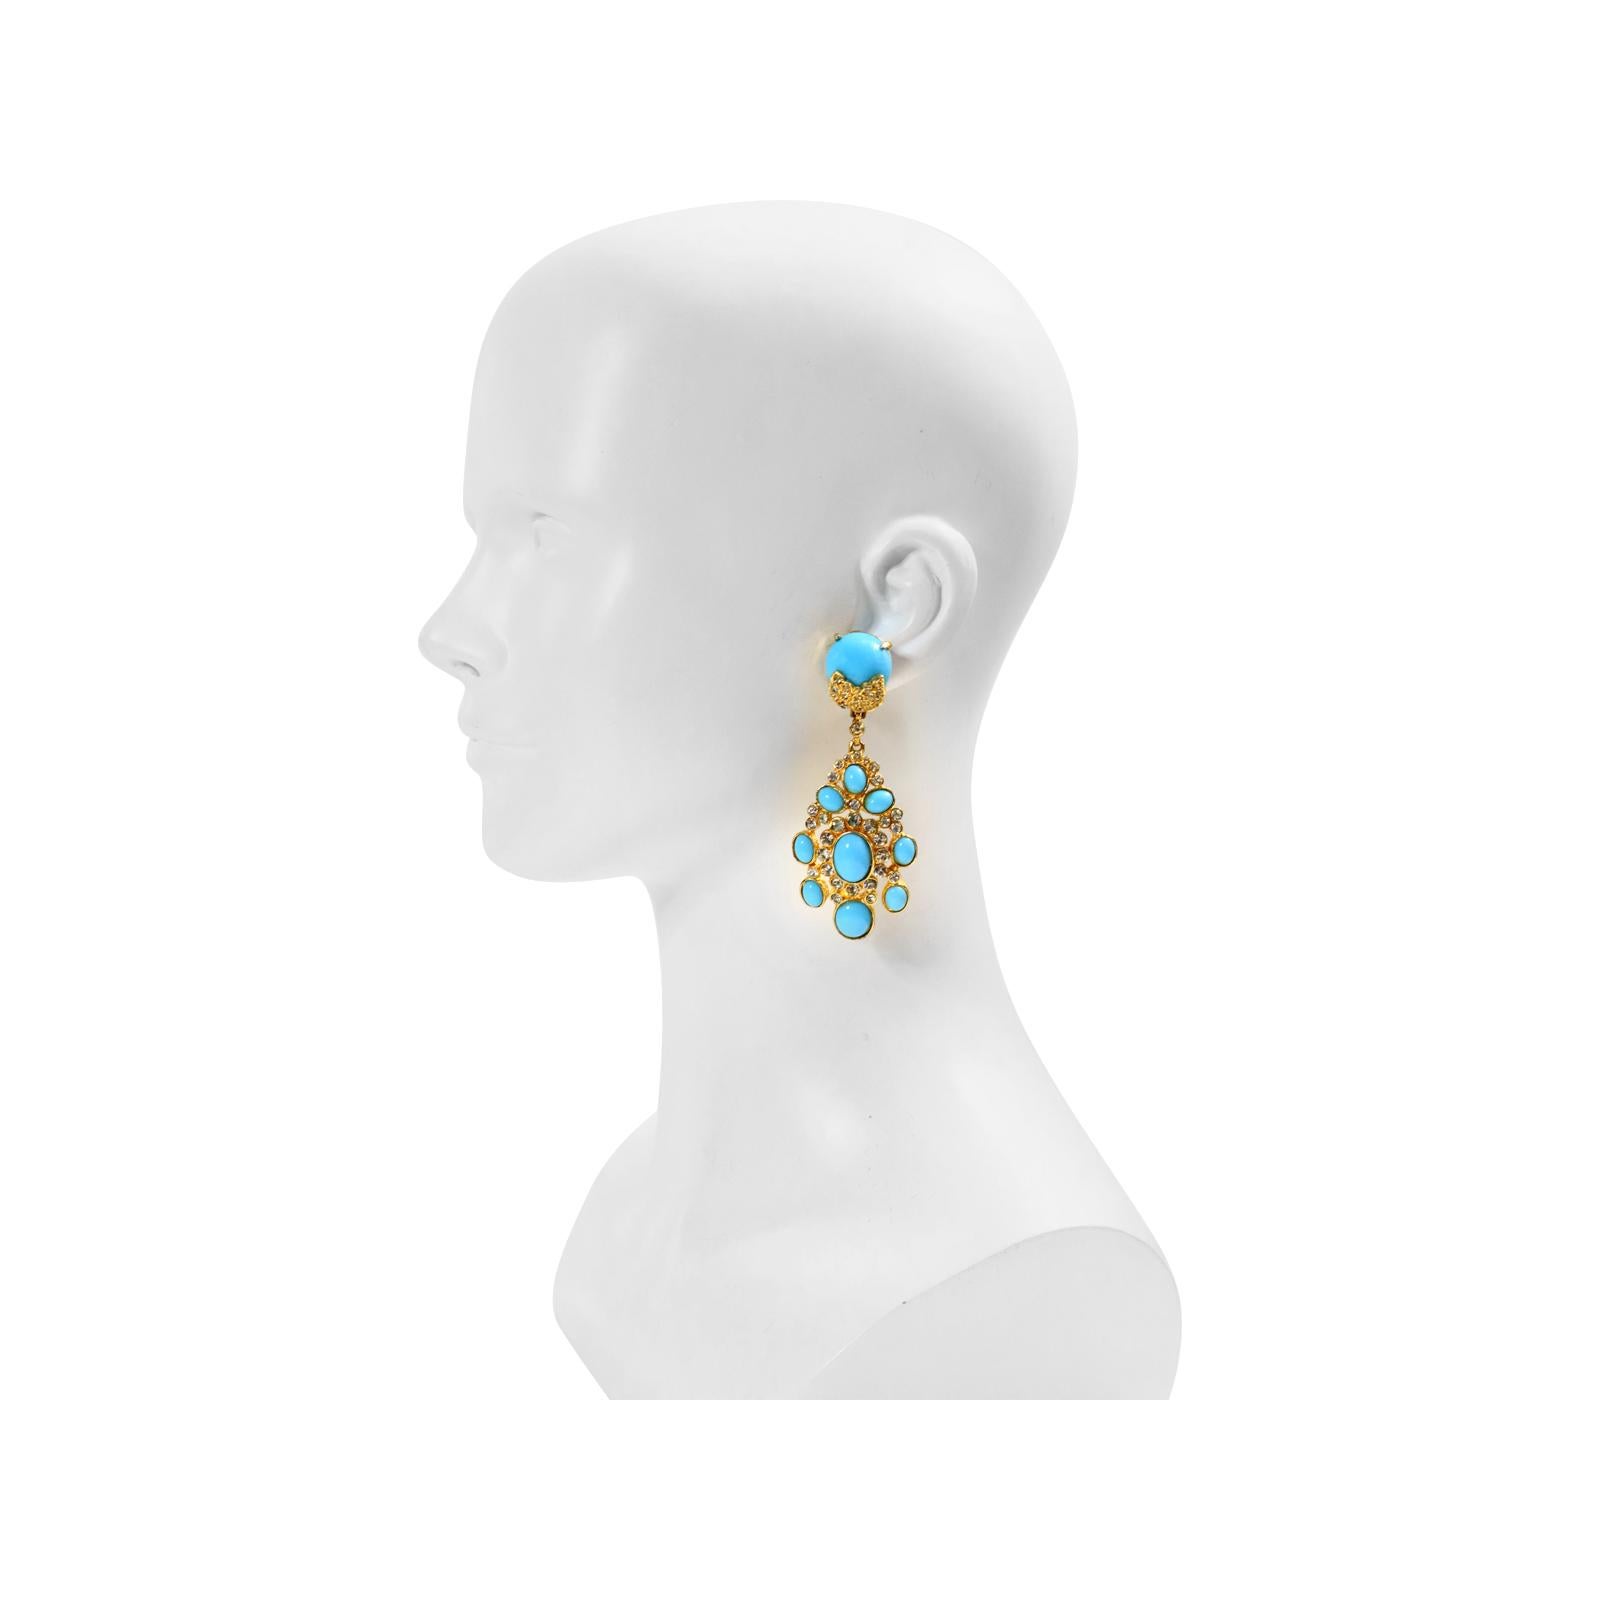 Vintage Cadoro Gold with Faux Turquoise Dangling Earrings Circa 1980s In Good Condition For Sale In New York, NY